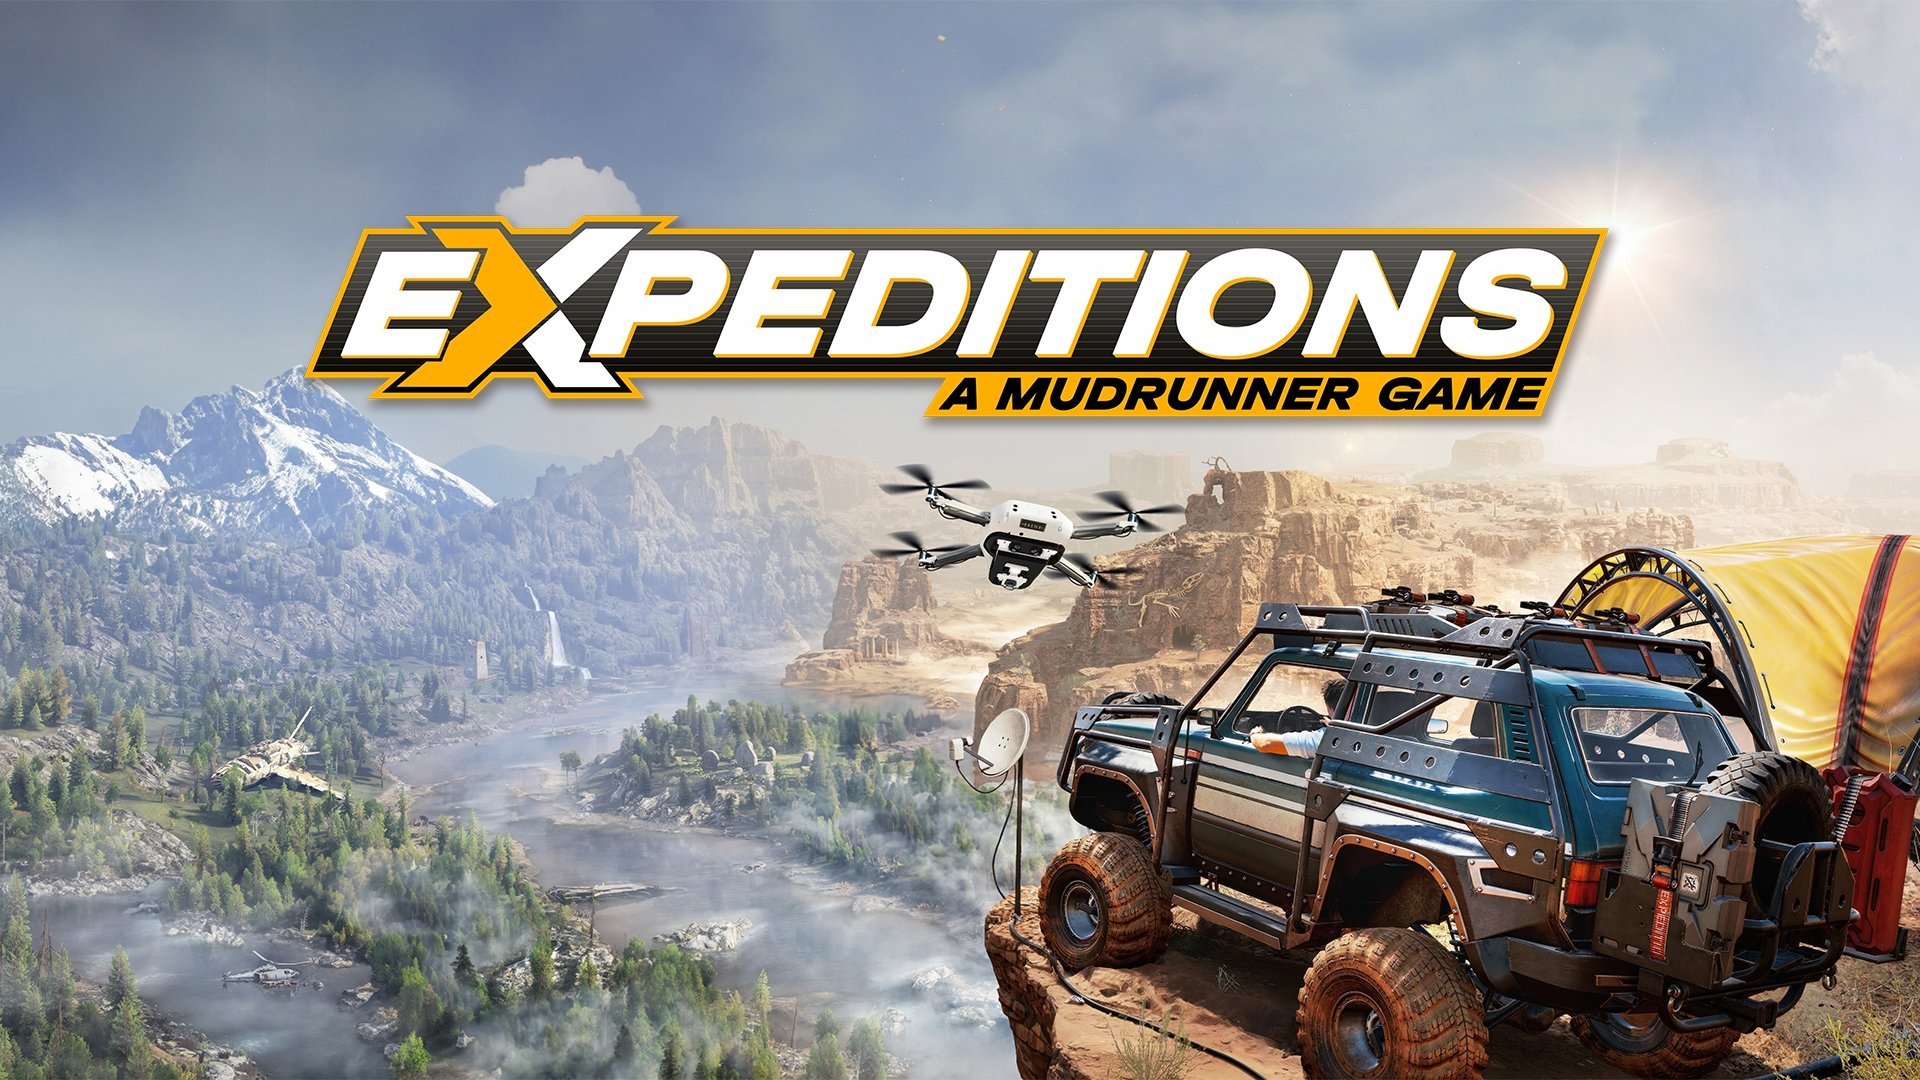 Expeditions game pass. Экспедишн игра. Expeditions: a MUDRUNNER game. Expeditions: a MUDRUNNER game геймплей. Вышла игра Expeditions: a MUDRUNNER game.